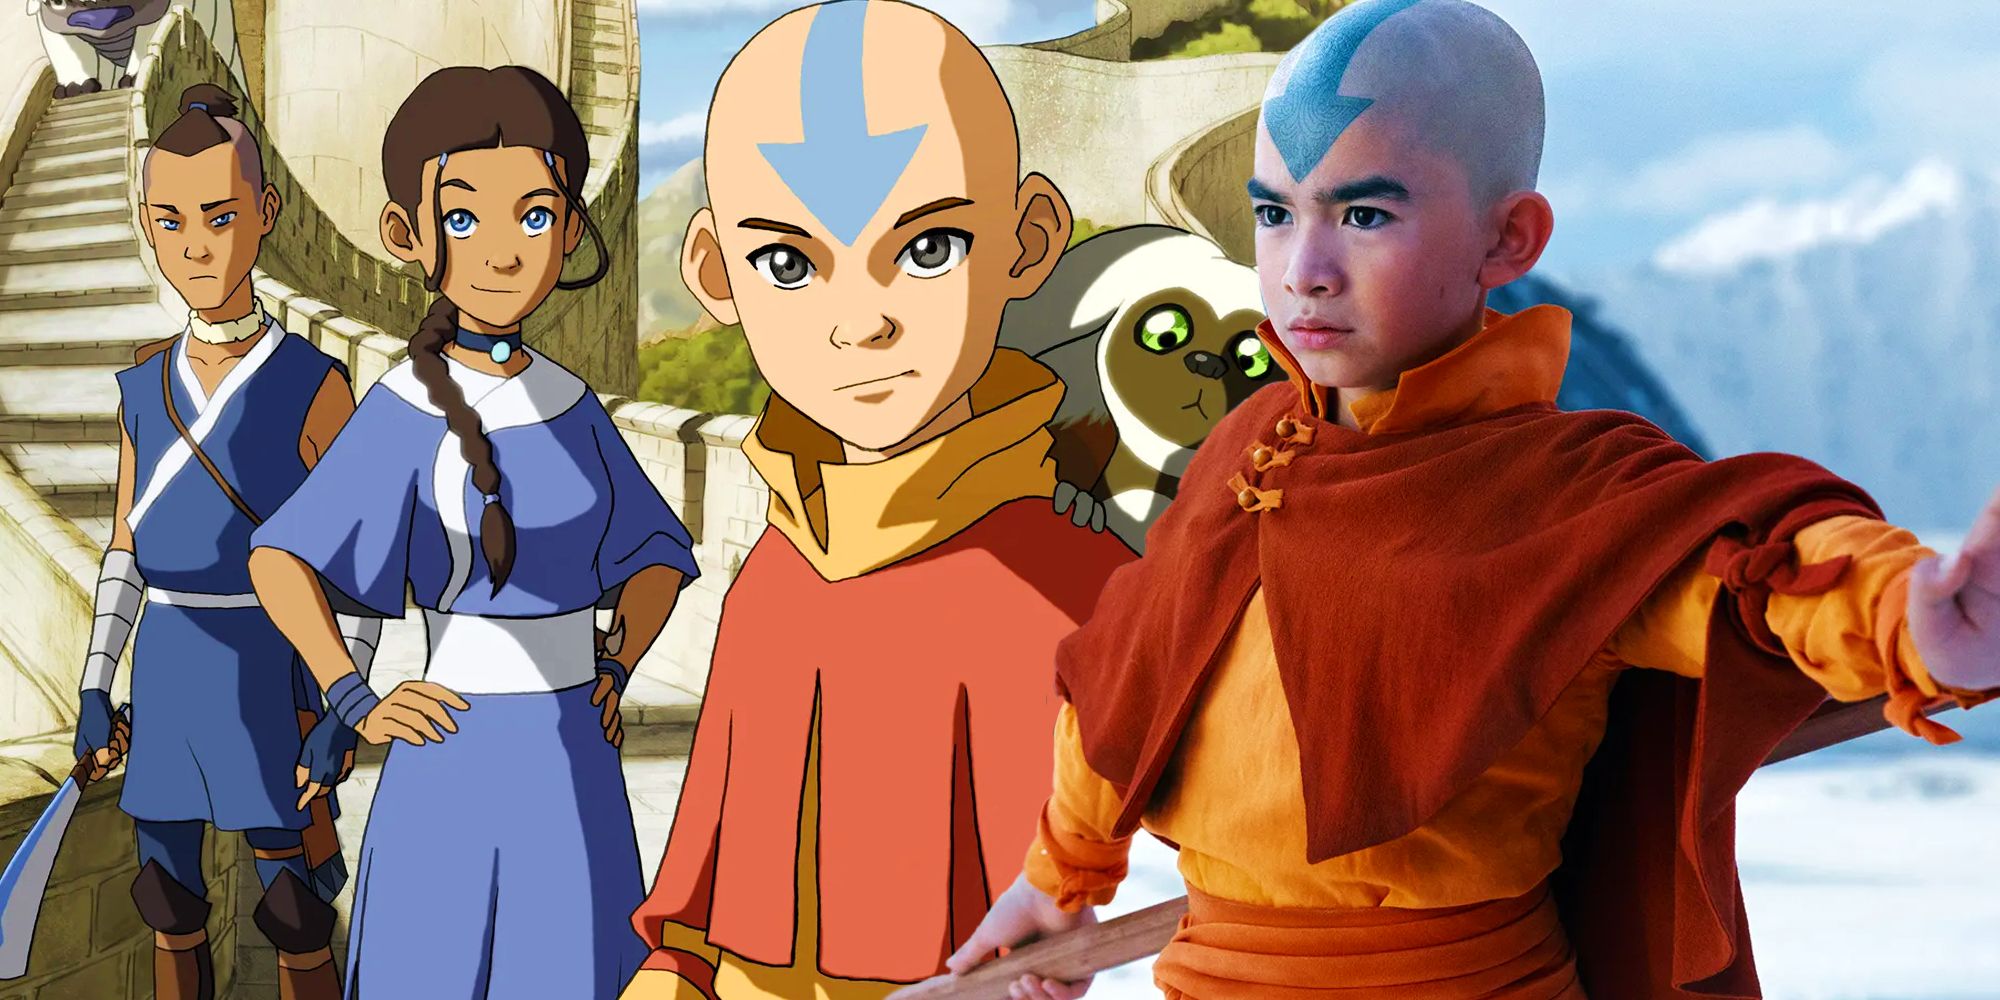 Aang from Avatar: The Last Airbender on Netflix next to the characters from the original show